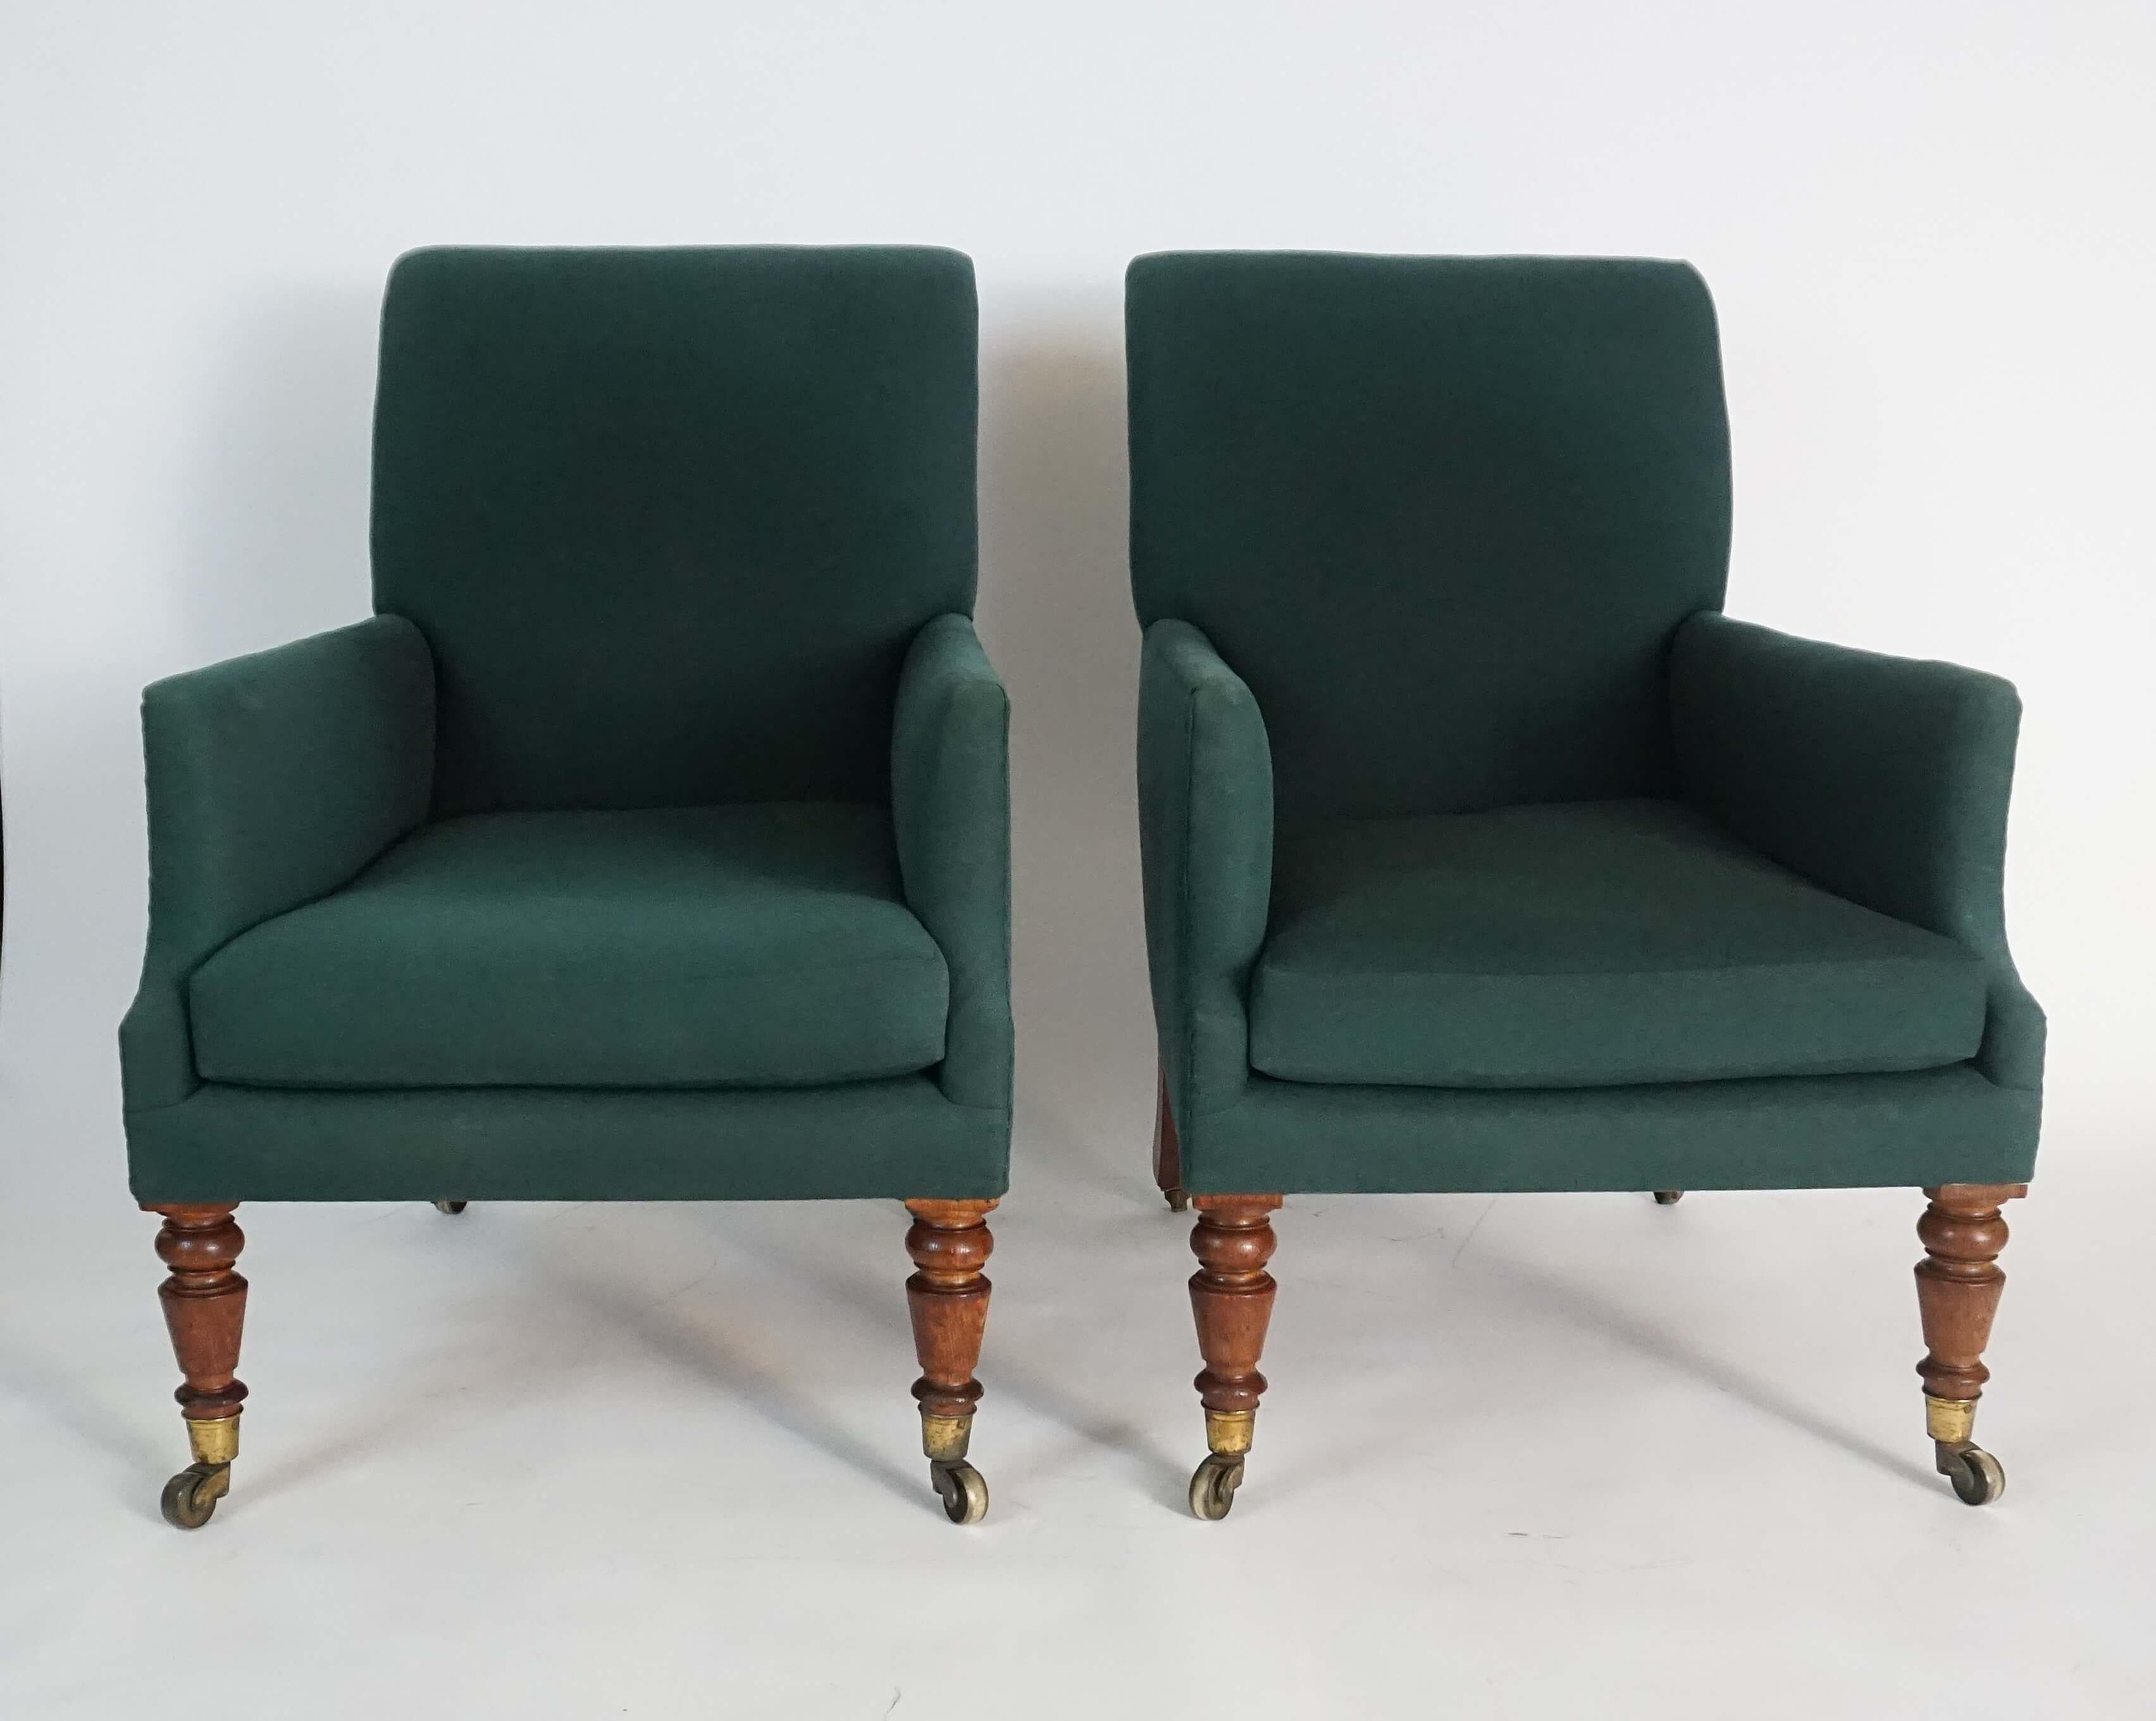 Pair of circa 1830 English Regency bergères of large scale having fully upholstered frames; the curved rectangular backs connecting deep seats with squab cushions and box-form arms on turned oak front legs and splayed rear all on original brass